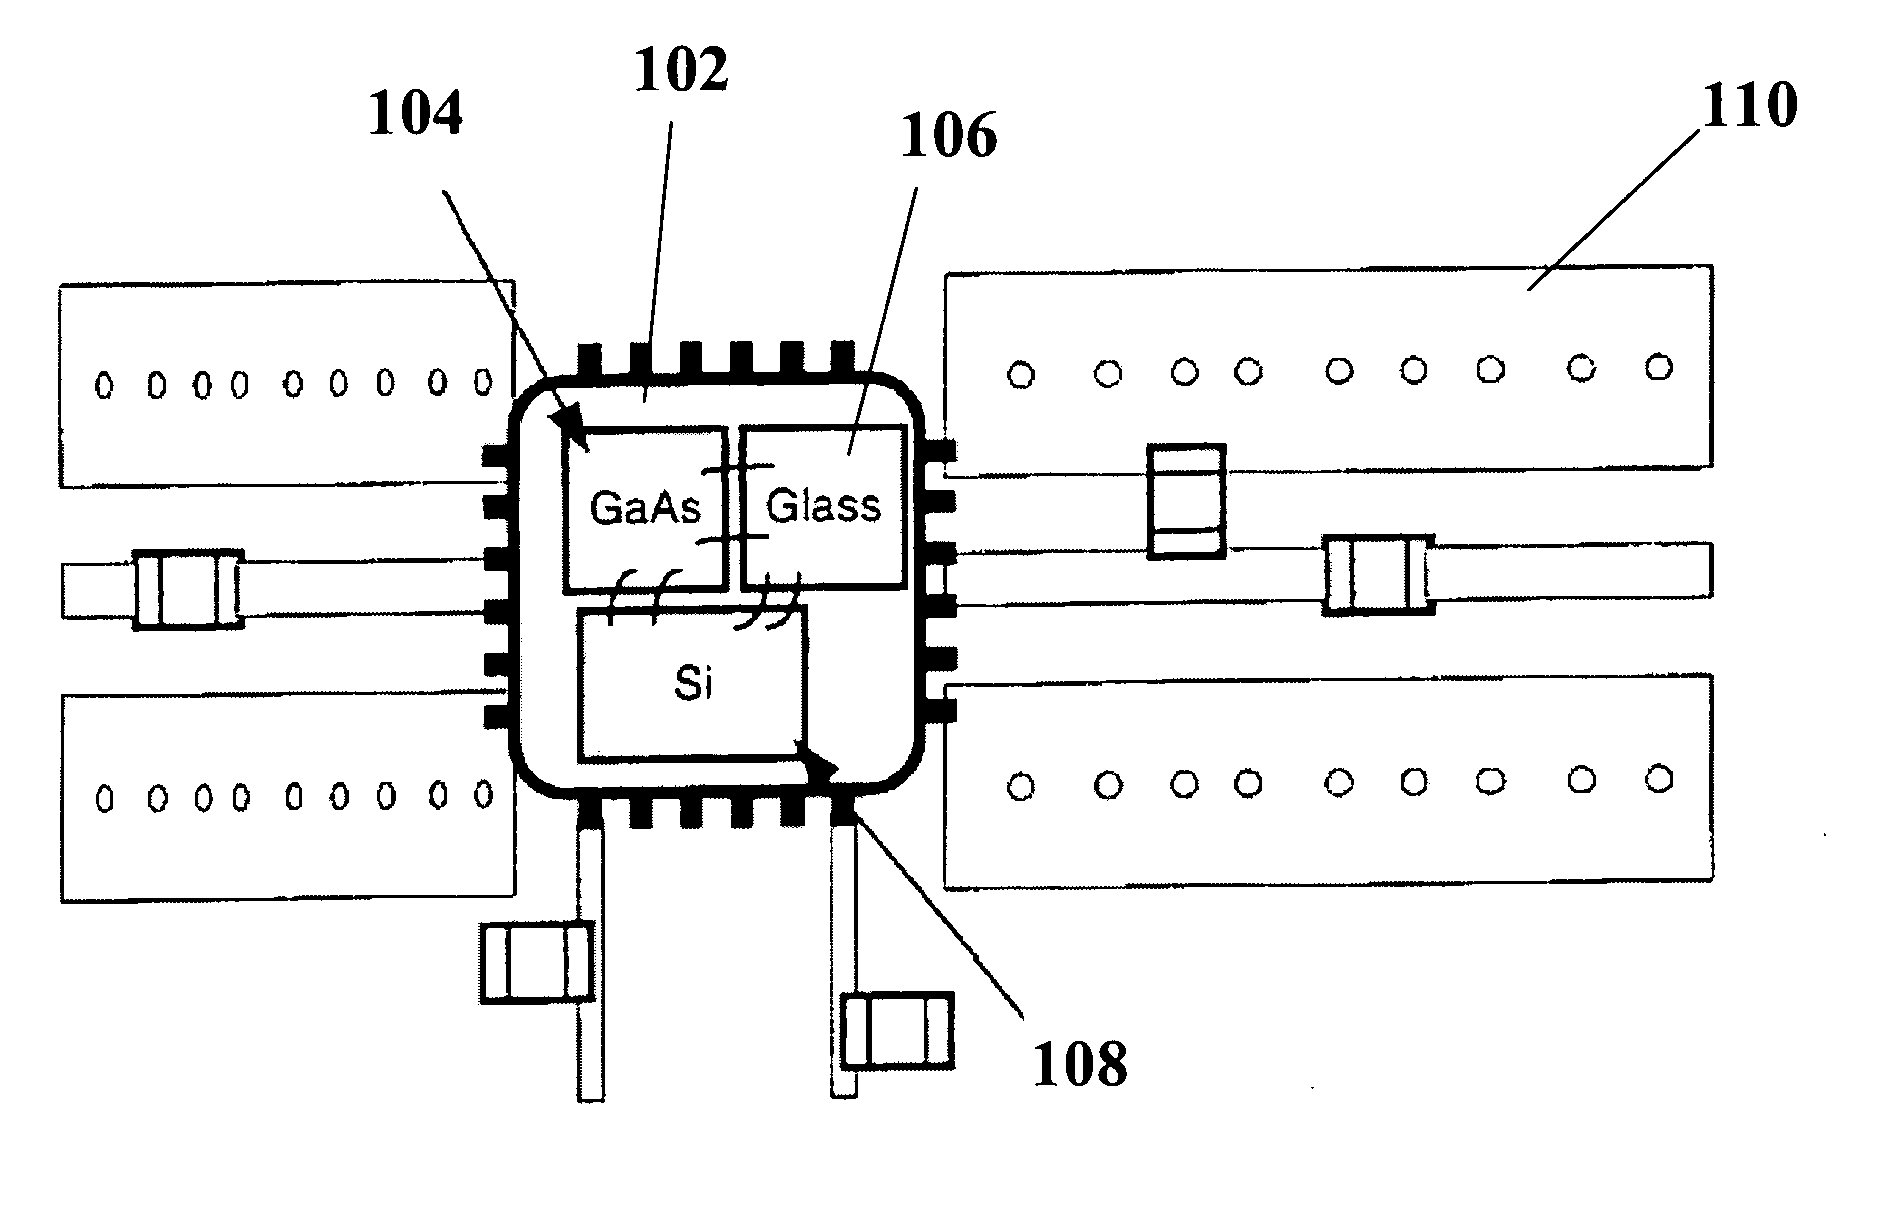 Apparatus, methods and articles of manufacture for a dual mode amplifier